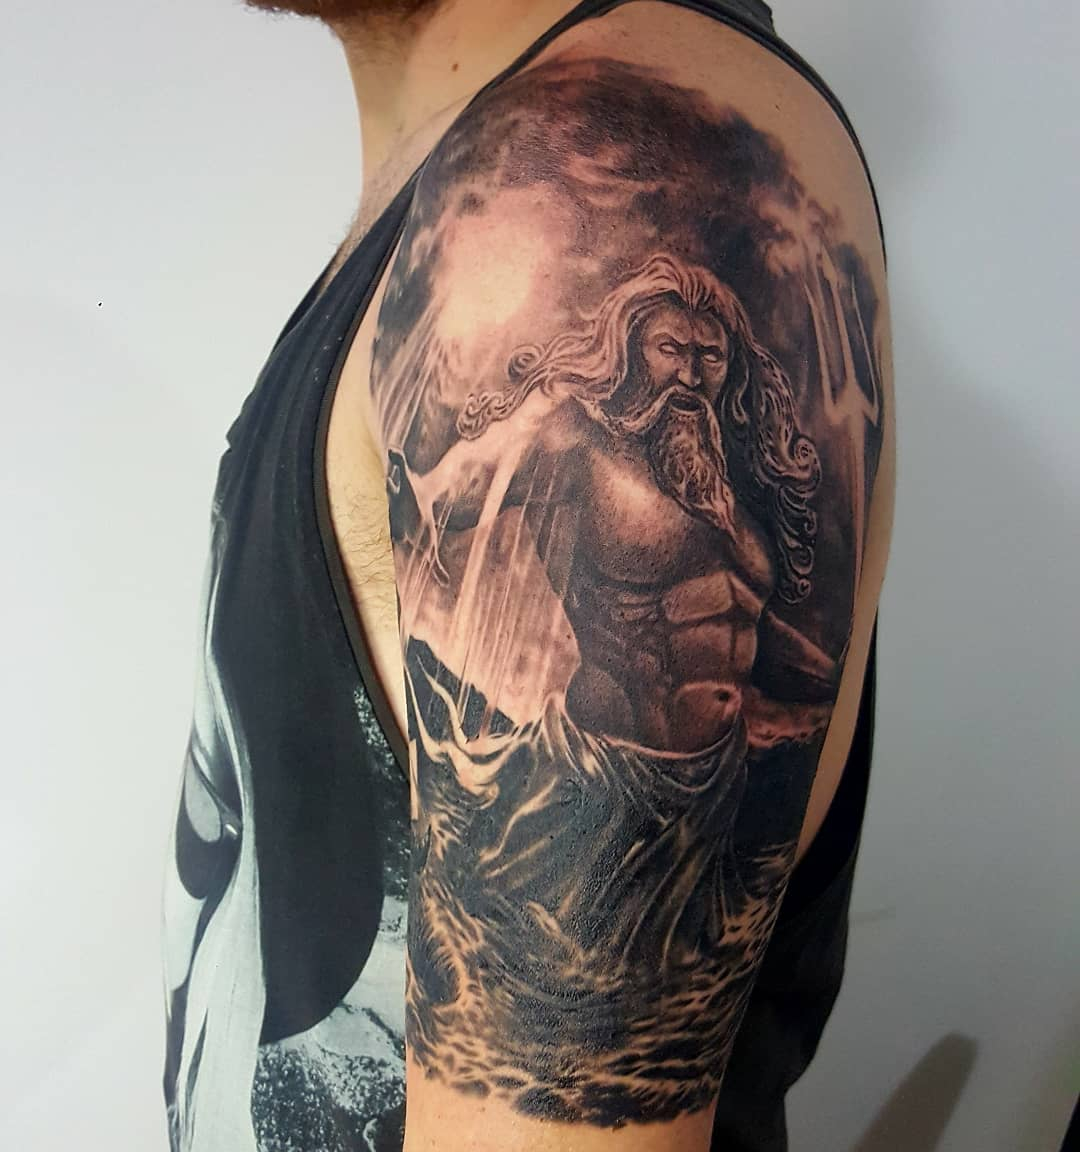 225 Coolest Shoulder Tattoos For Men And Women This Year regarding measurements 1080 X 1152